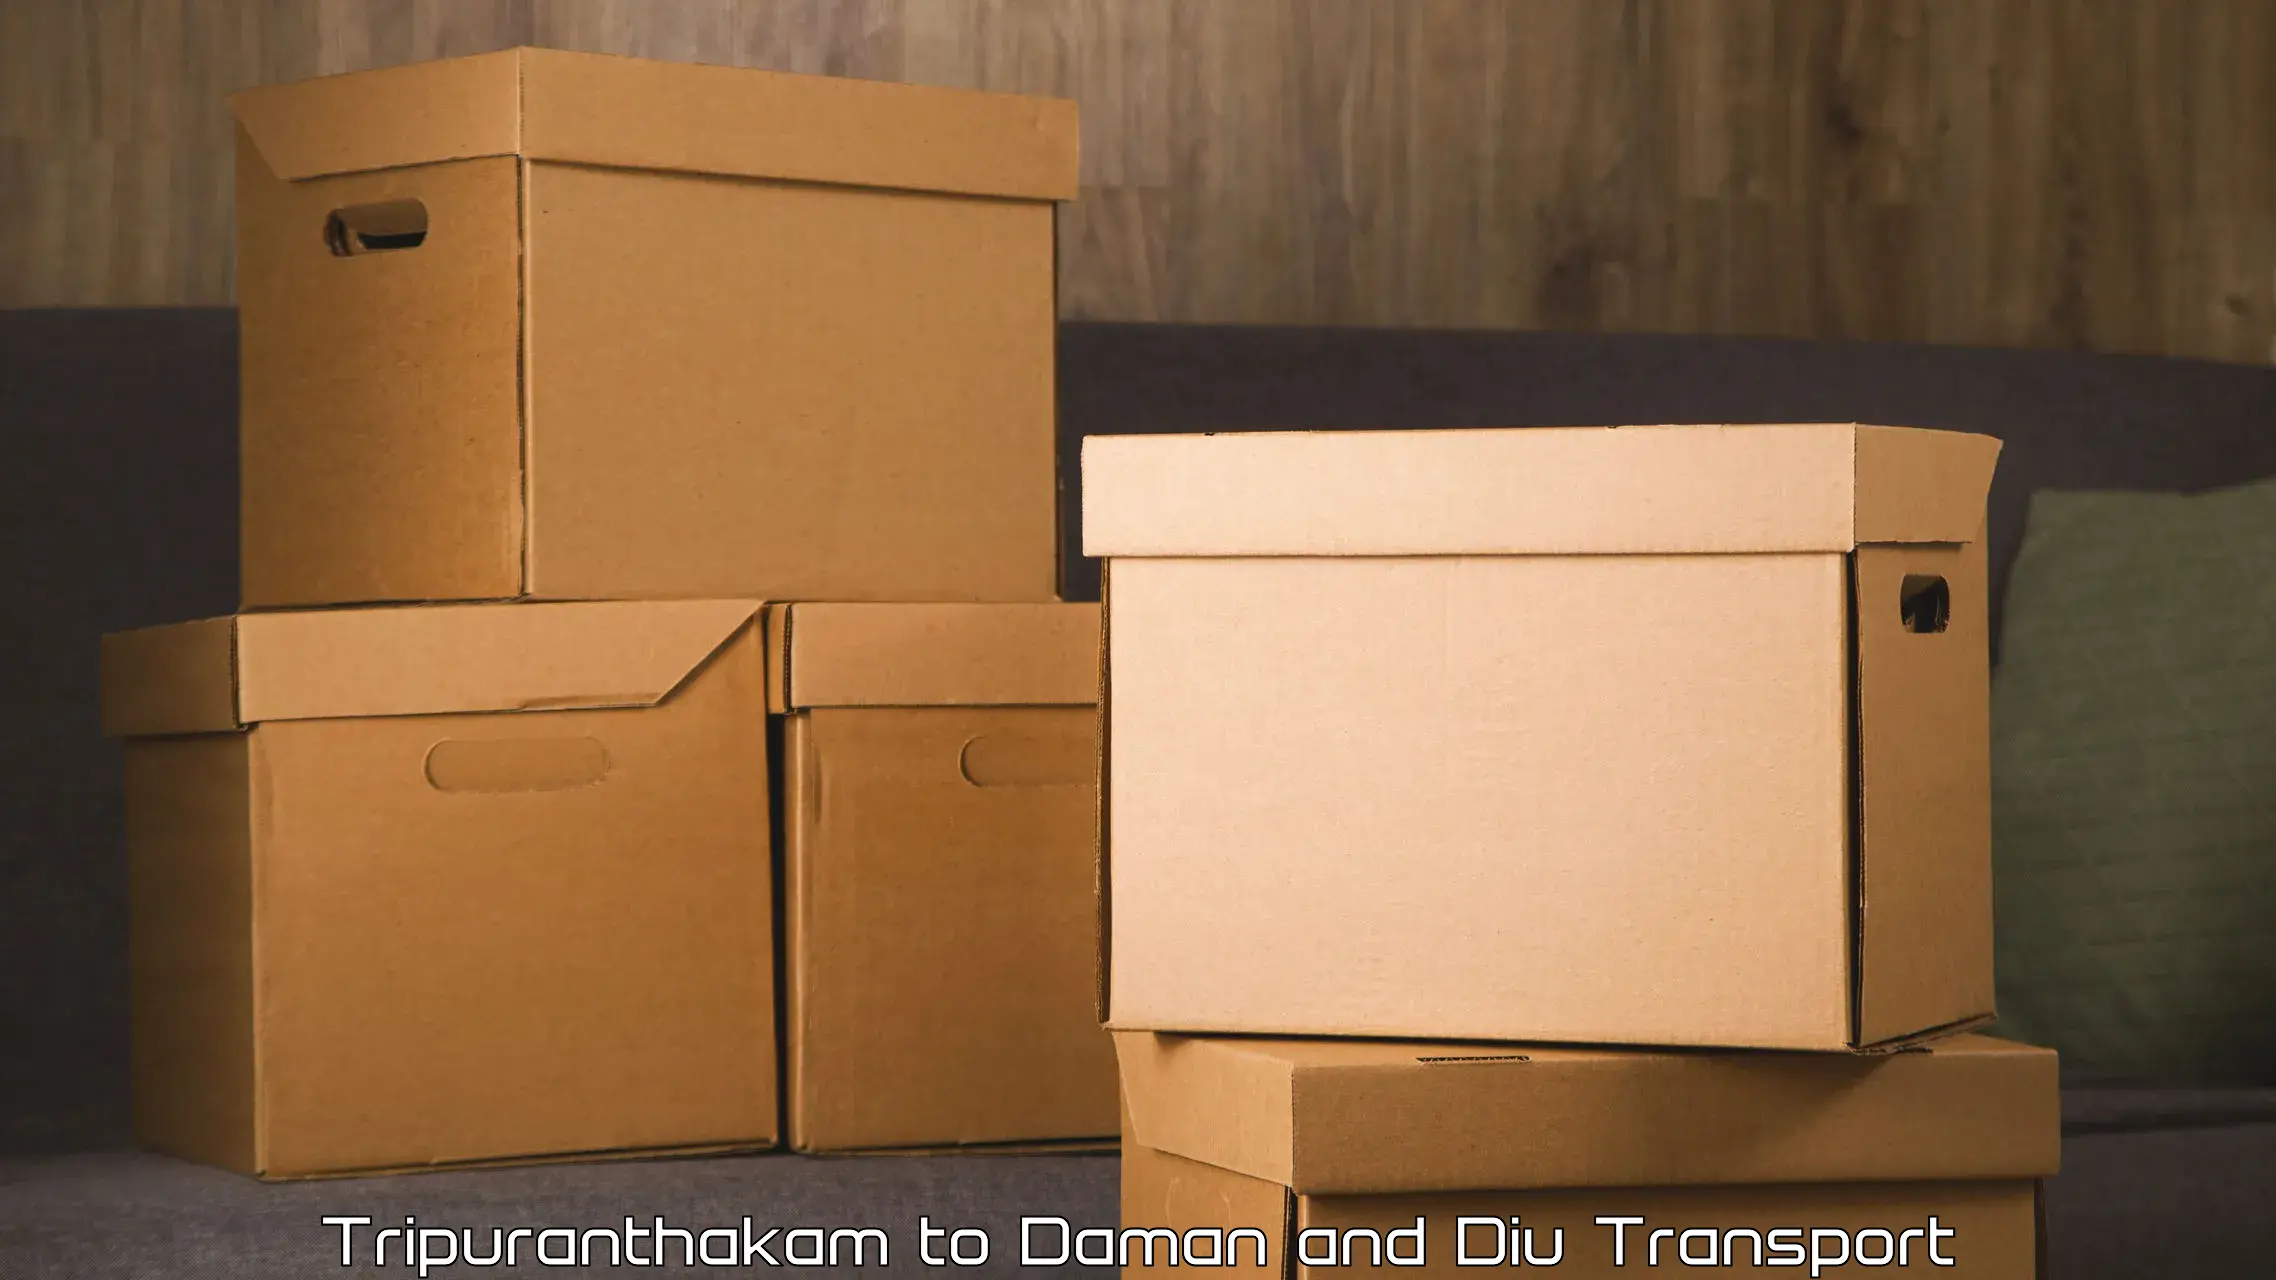 Transportation services in Tripuranthakam to Daman and Diu